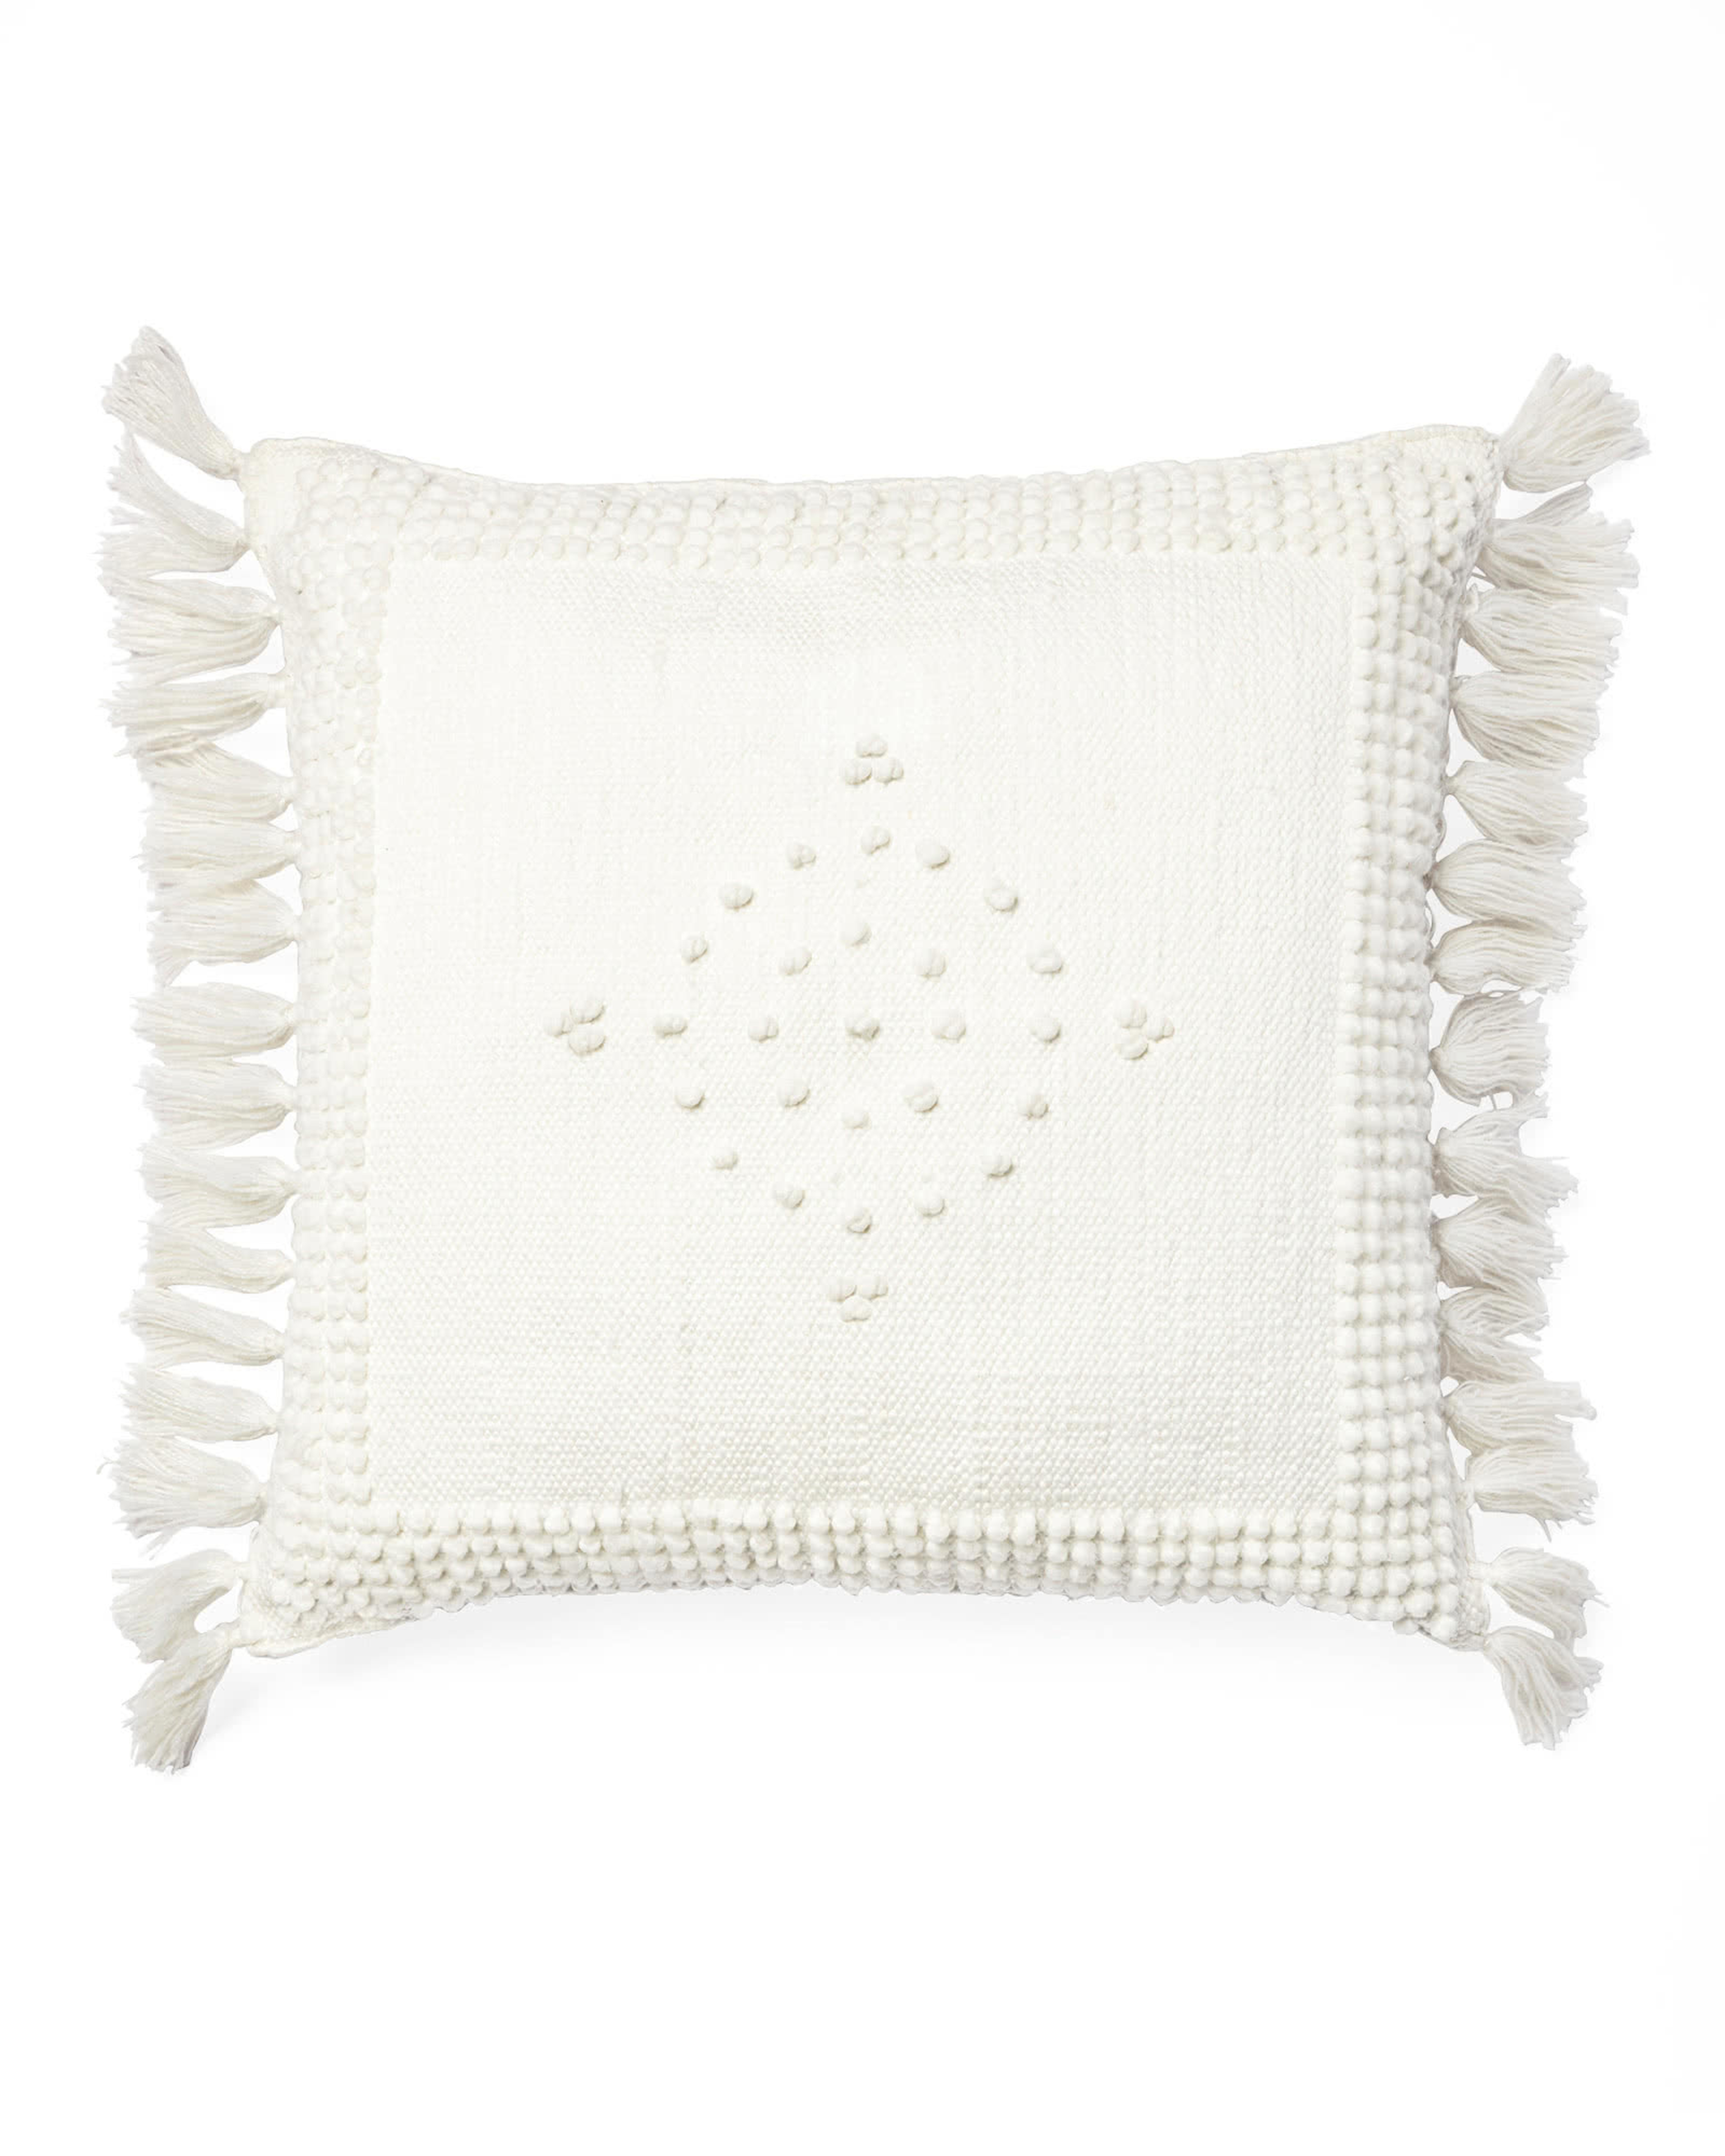 Montecito Pillow Cover - Serena and Lily